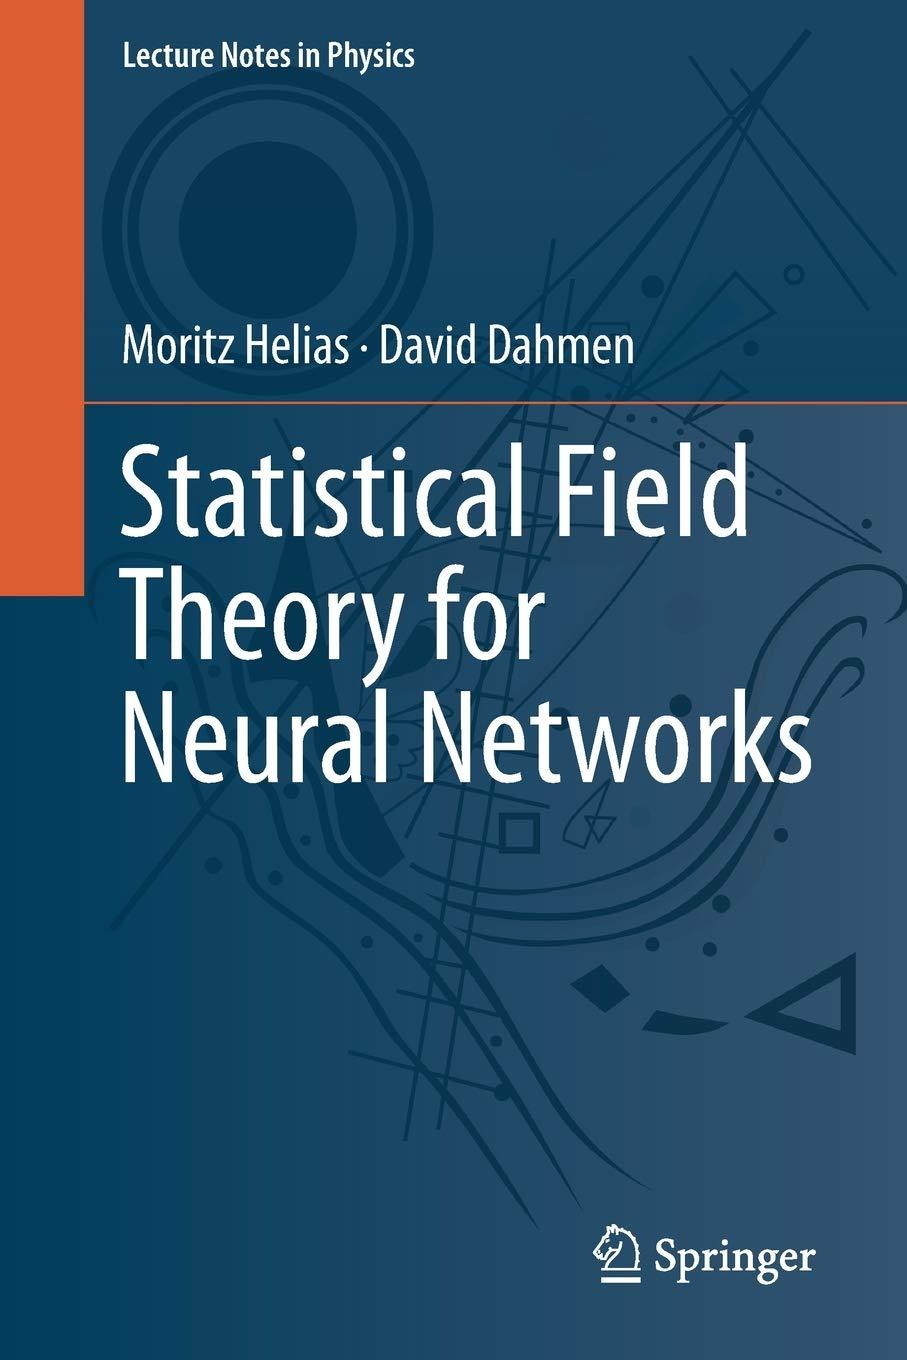 statistical field theory for neural networks 1st edition moritz helias, david dahmen 978-3030464431